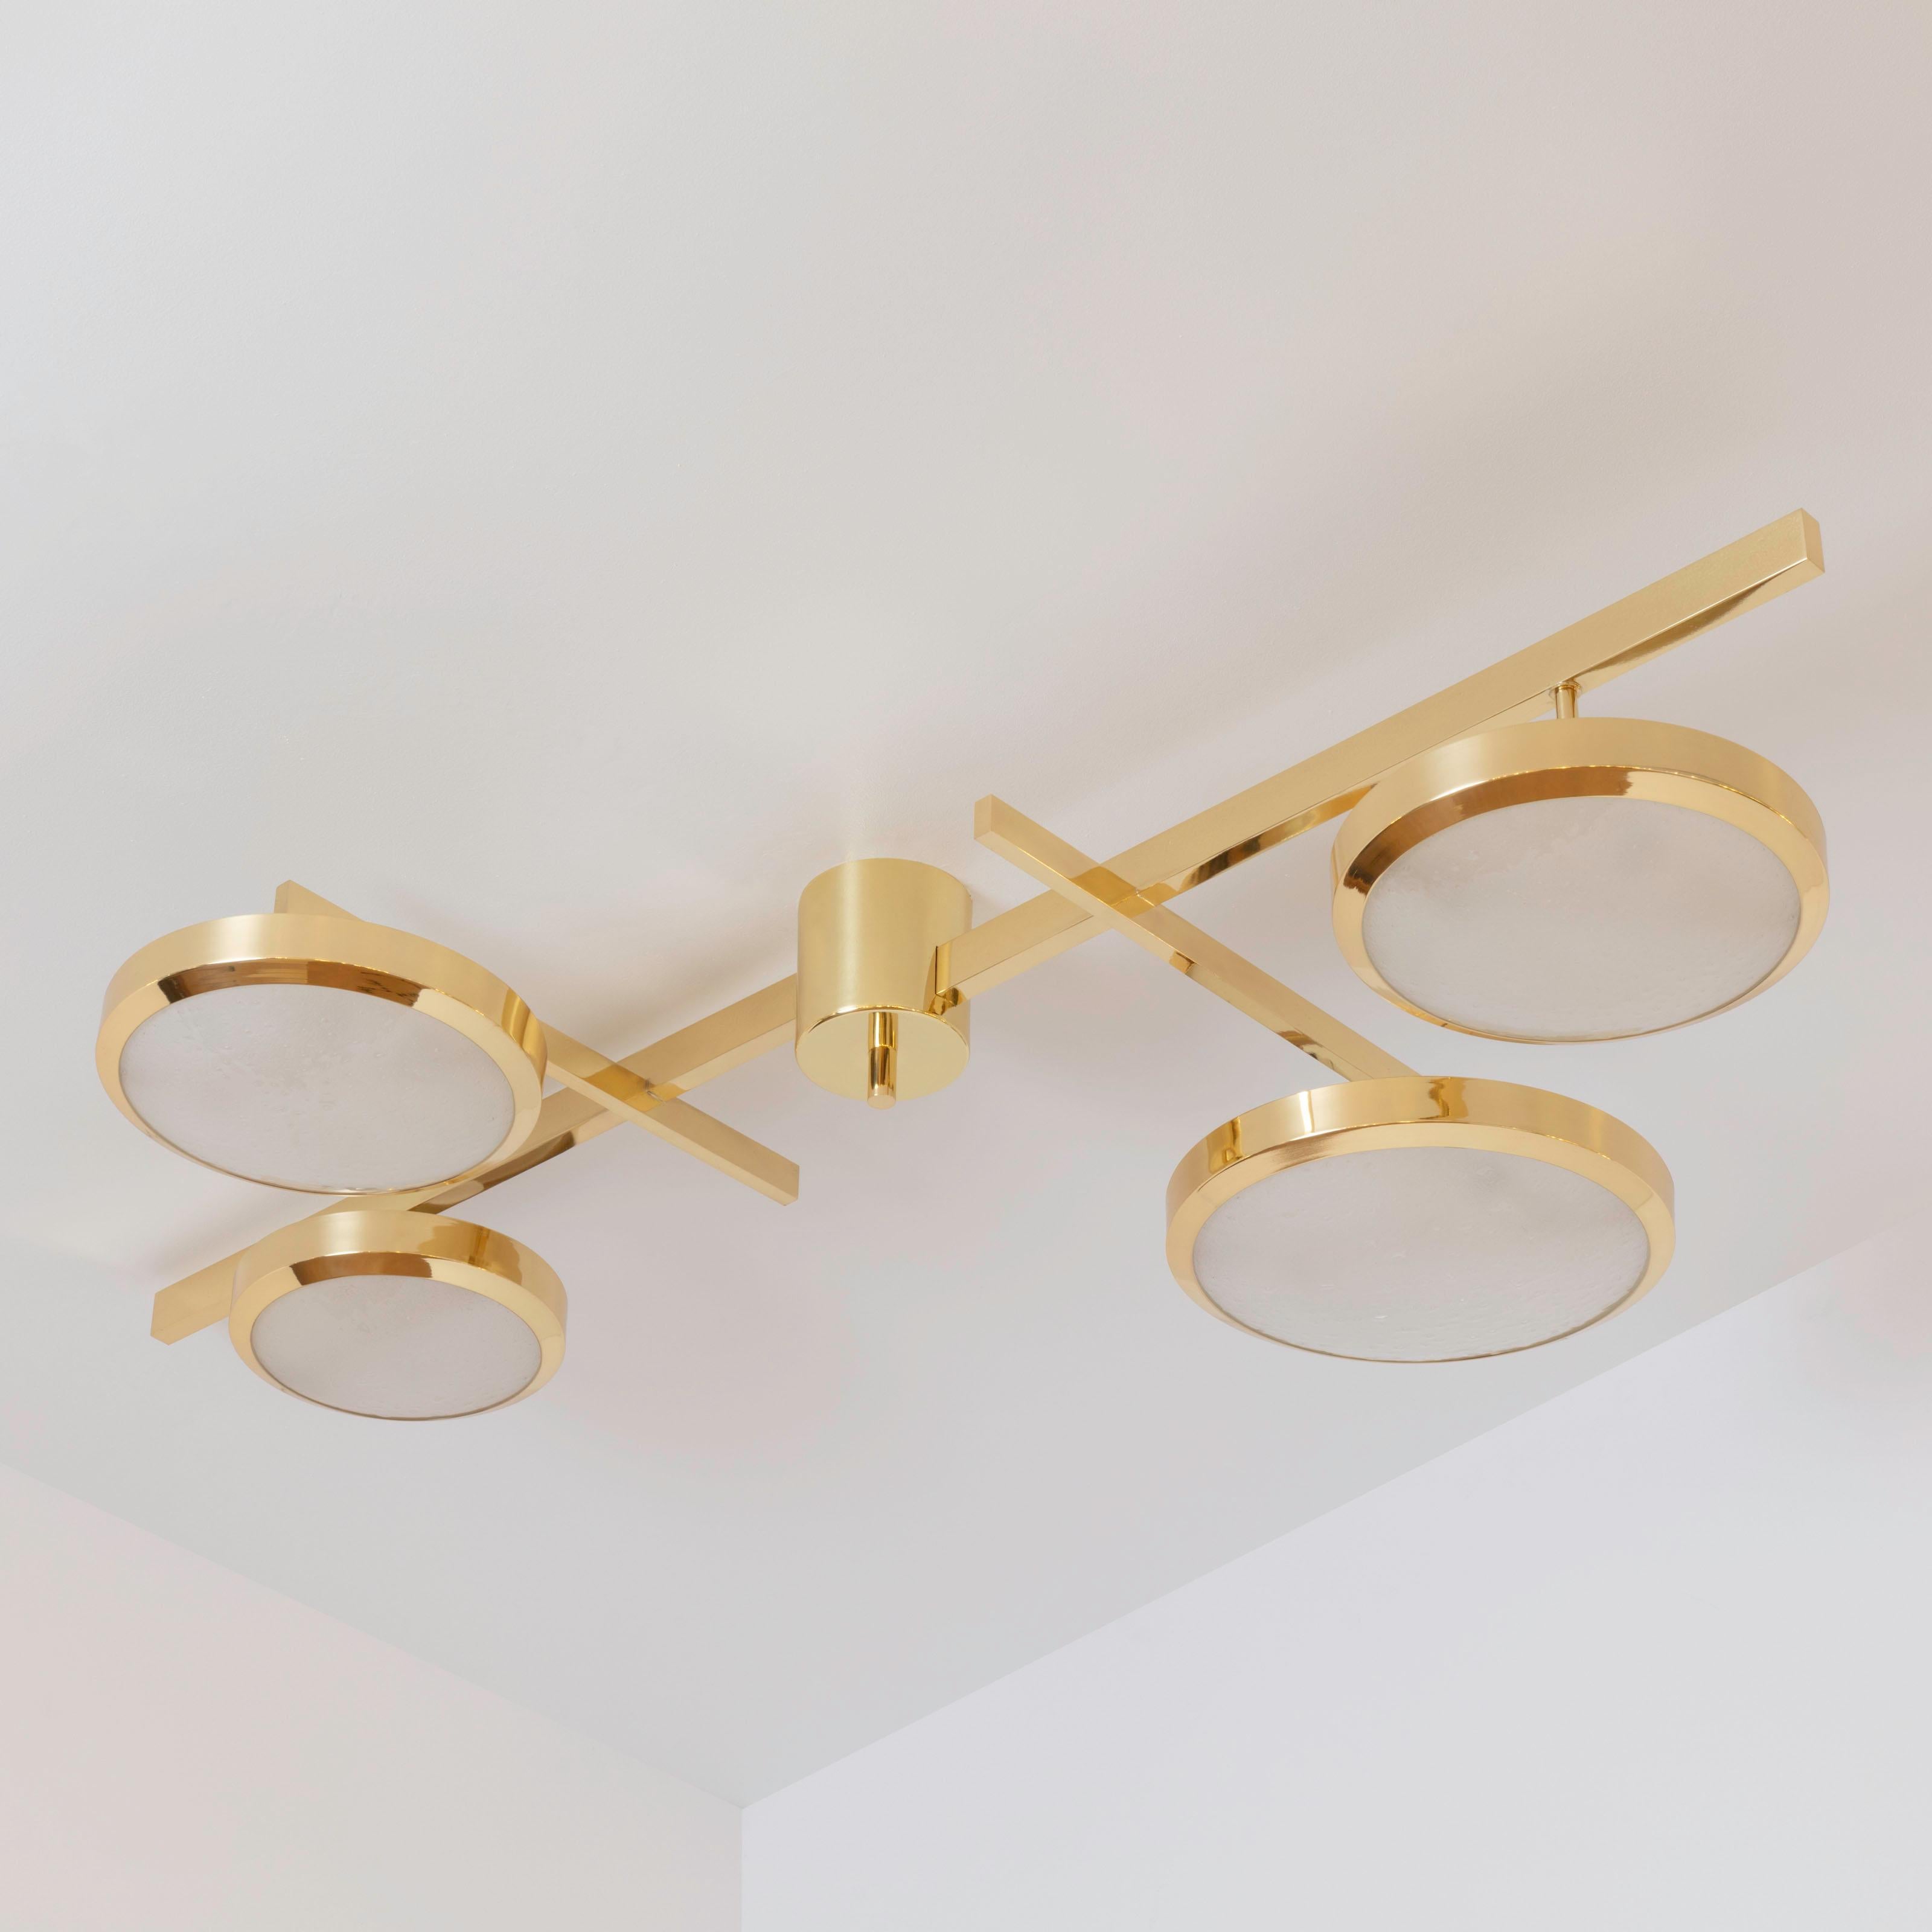 Tetrix Ceiling Light by Gaspare Asaro - Satin Brass Finish For Sale 2